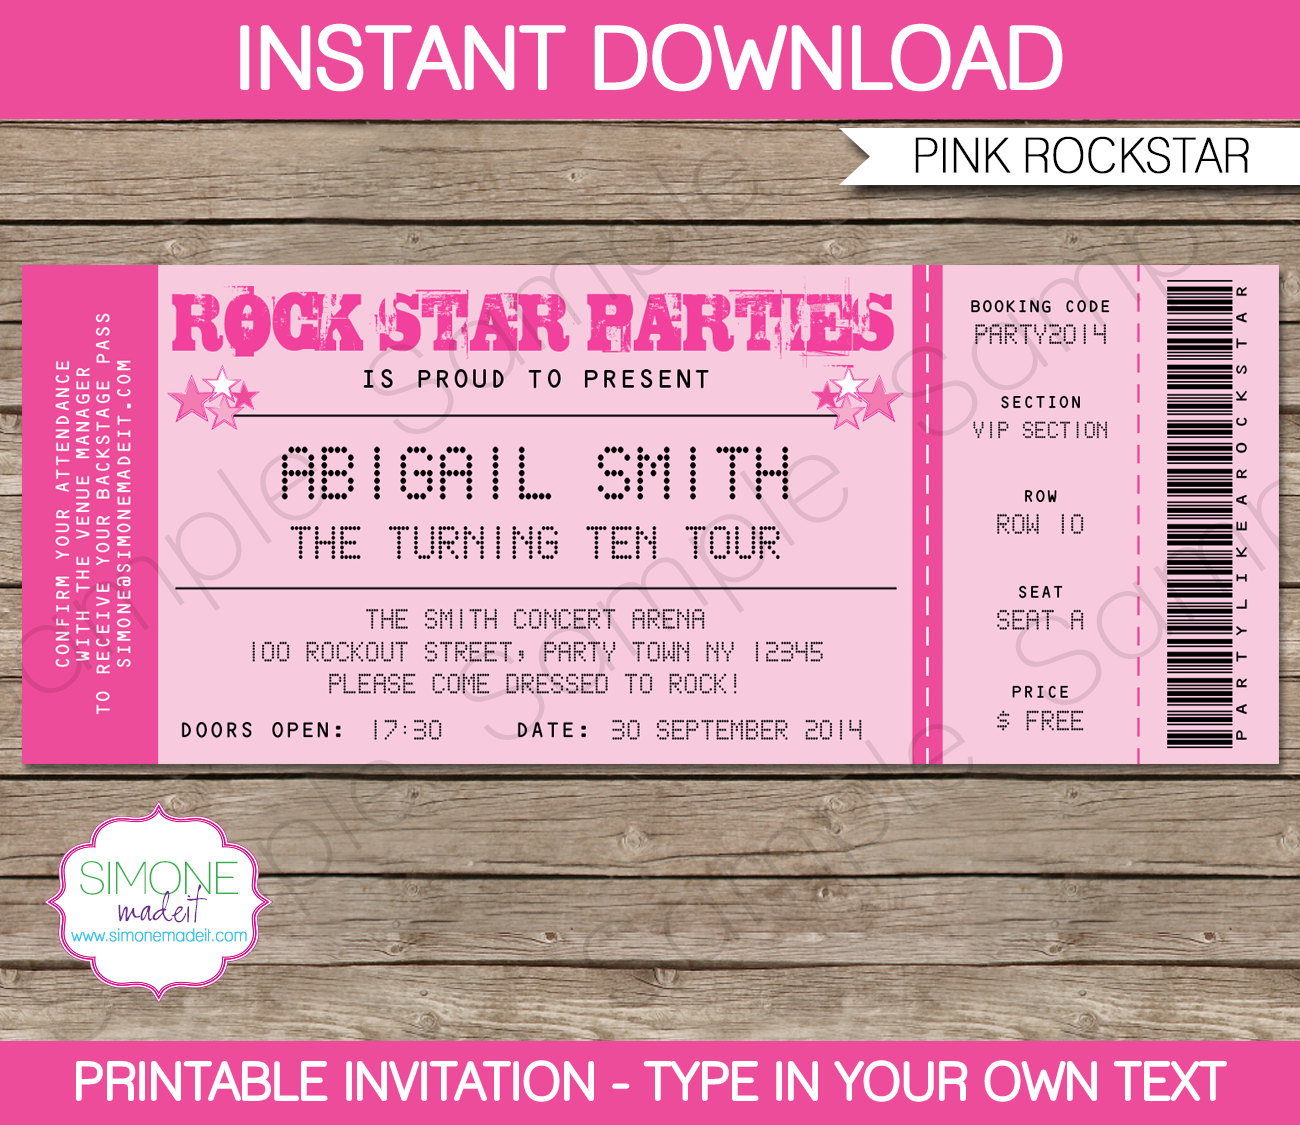 Rockstar Invitation Template Karaoke Invitation Birthday Party Pink Instant Download With Editable Text You Personalize At Home inside proportions 1300 X 1125